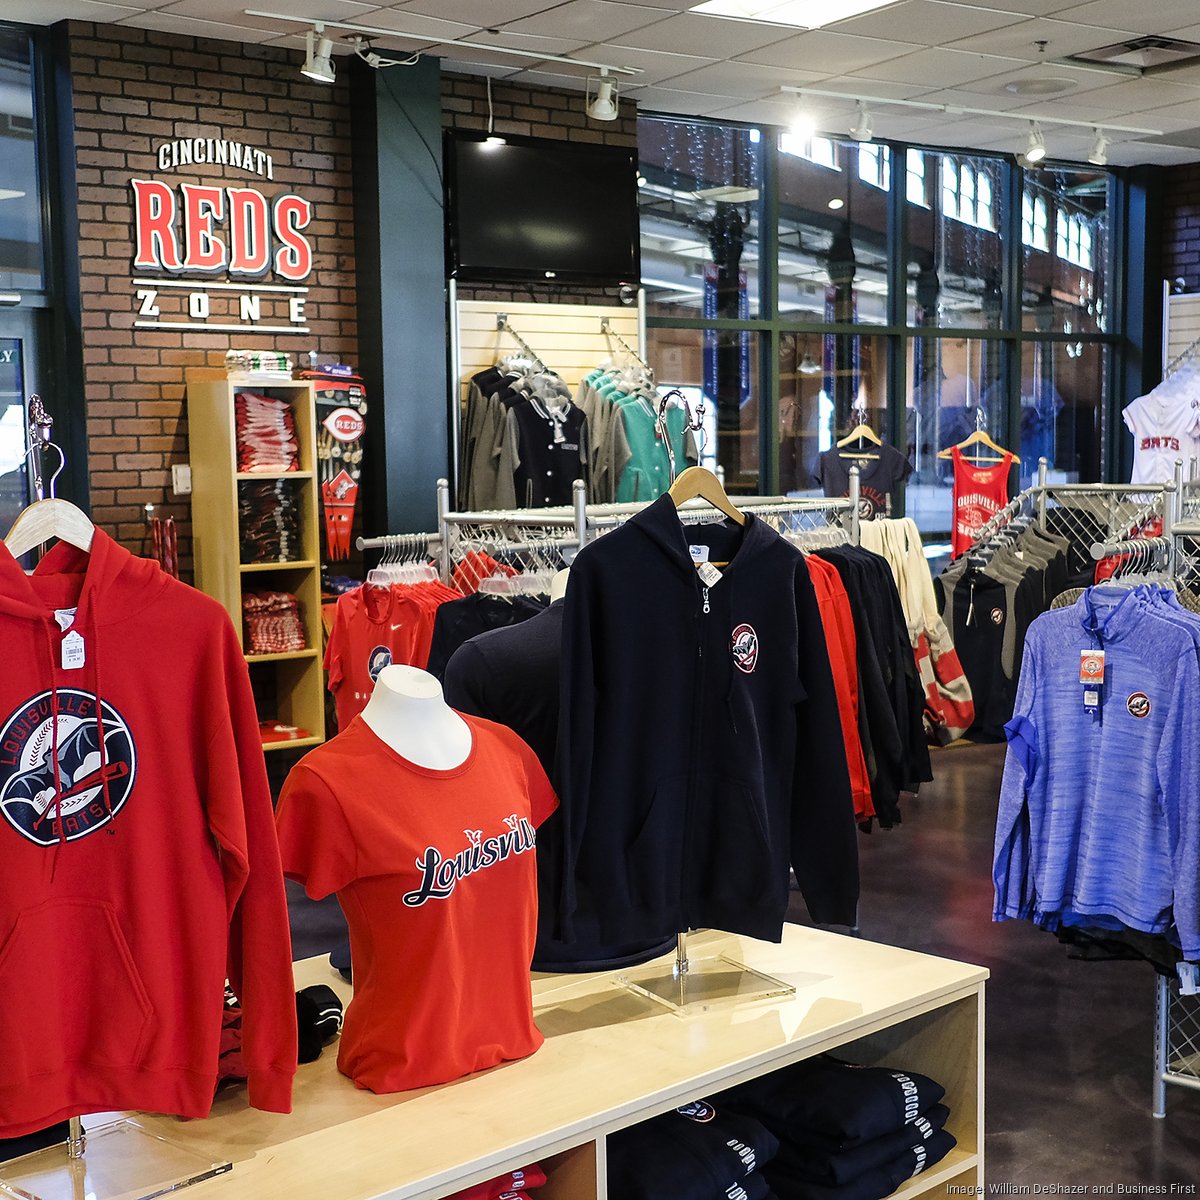 Gallery  Louisville Bats unveil new look for 2016